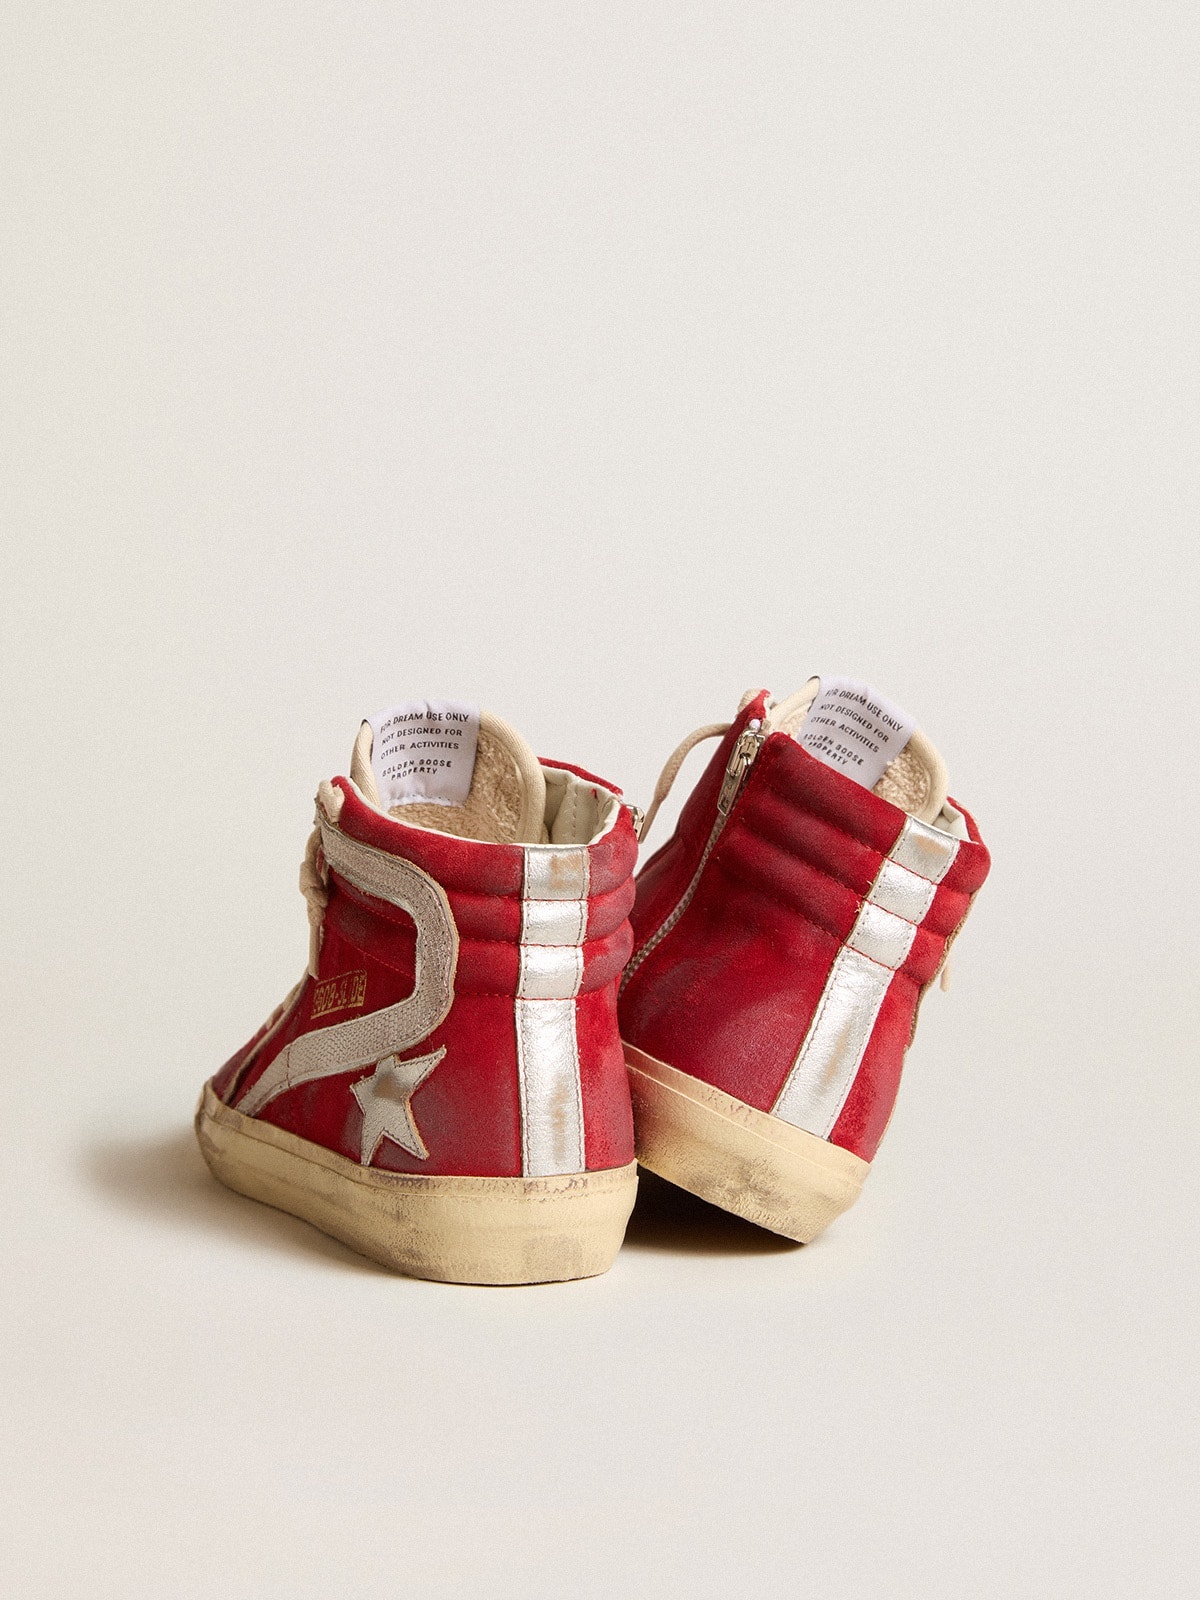 Slide in red suede with silver star and lizard print flash - 4